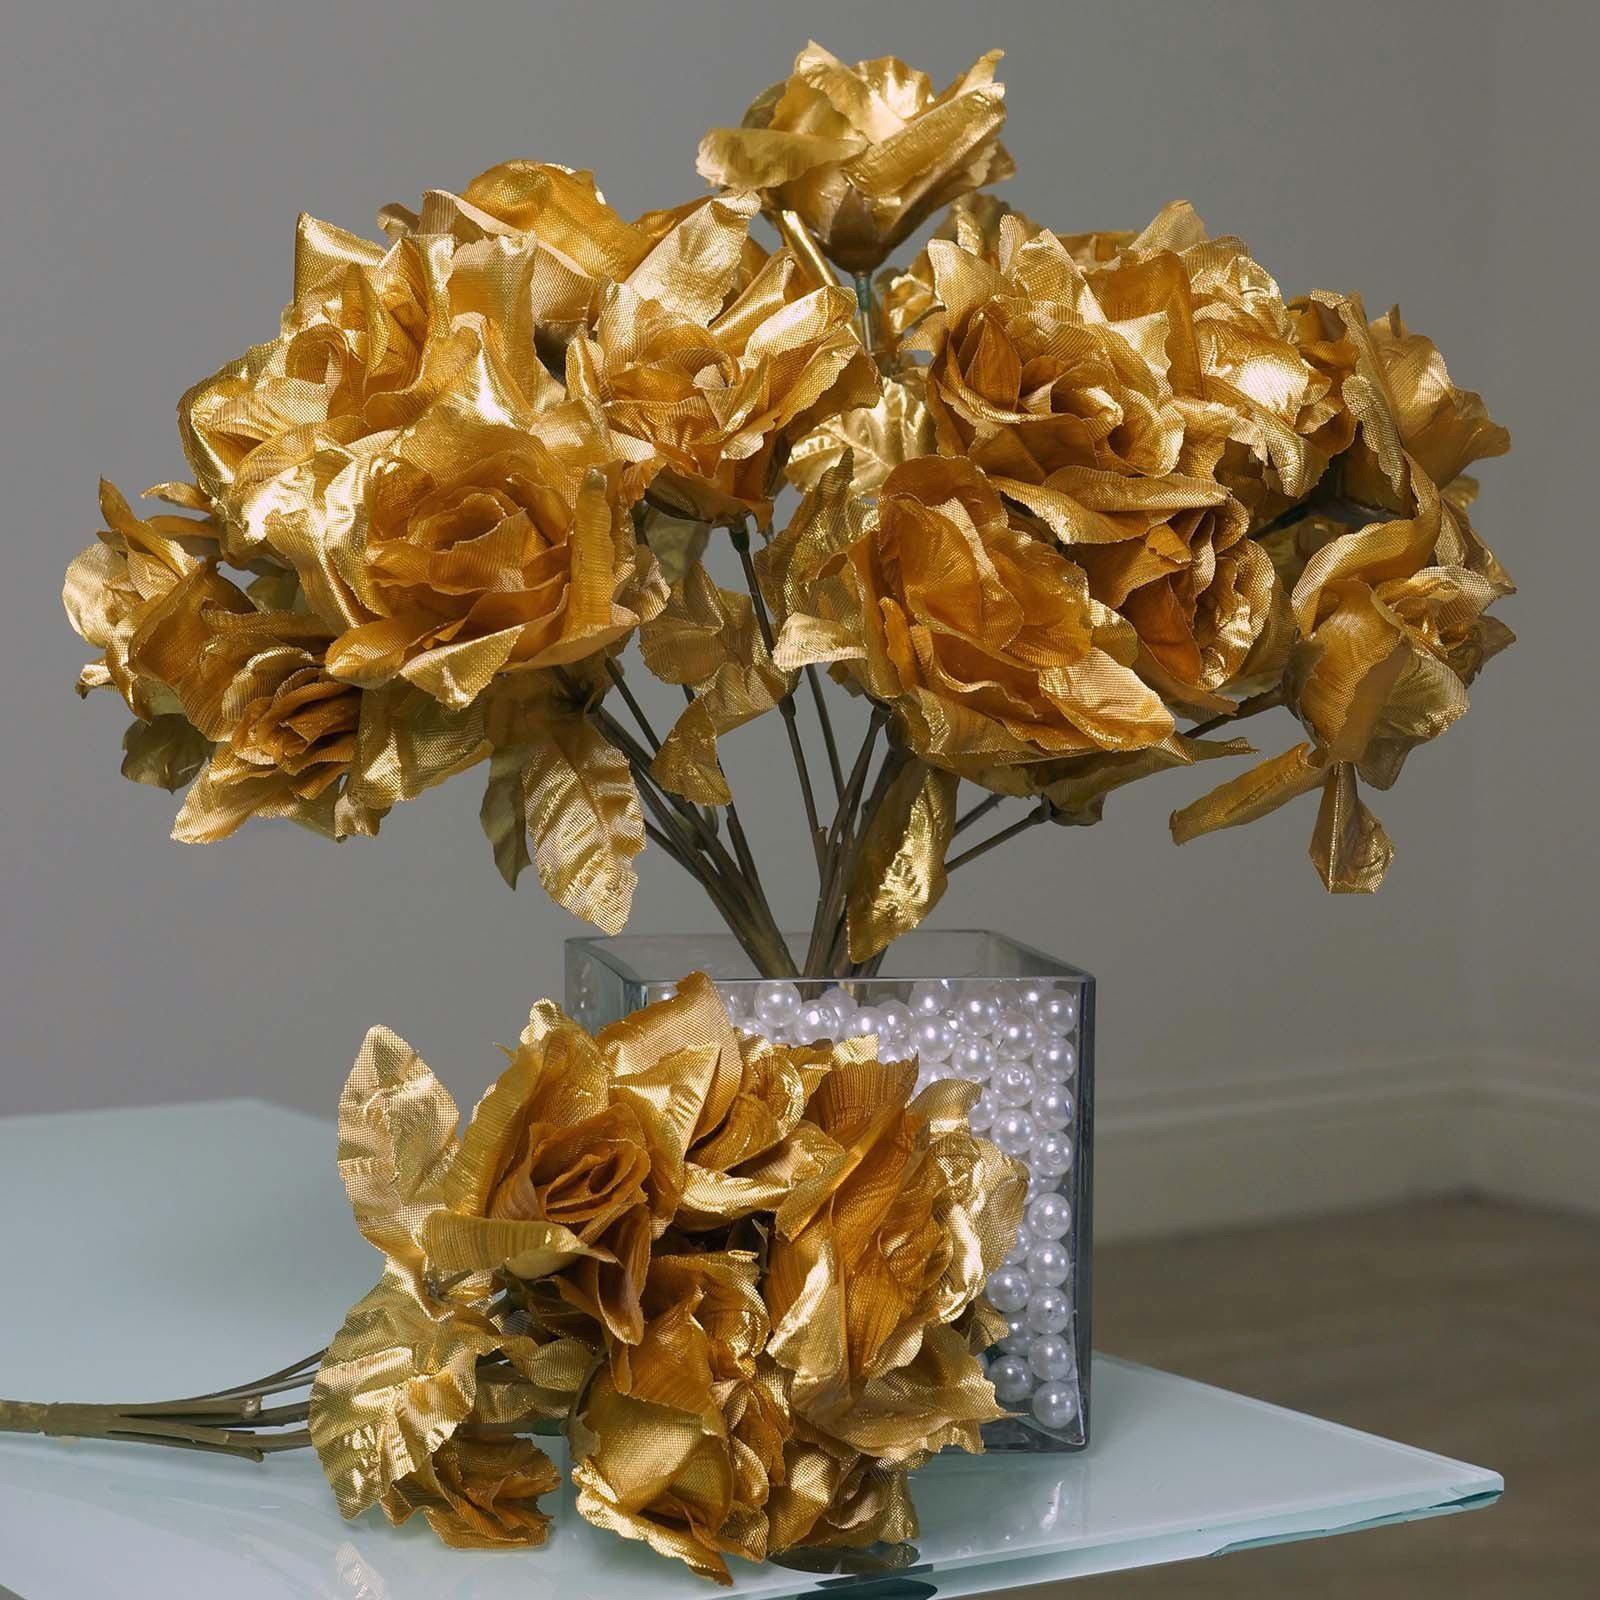 Buy 12 Bushes 84 pcs Gold Silk Artificial Roses Wholesale Flowers With  Green Leaves at Tablecloth Factory